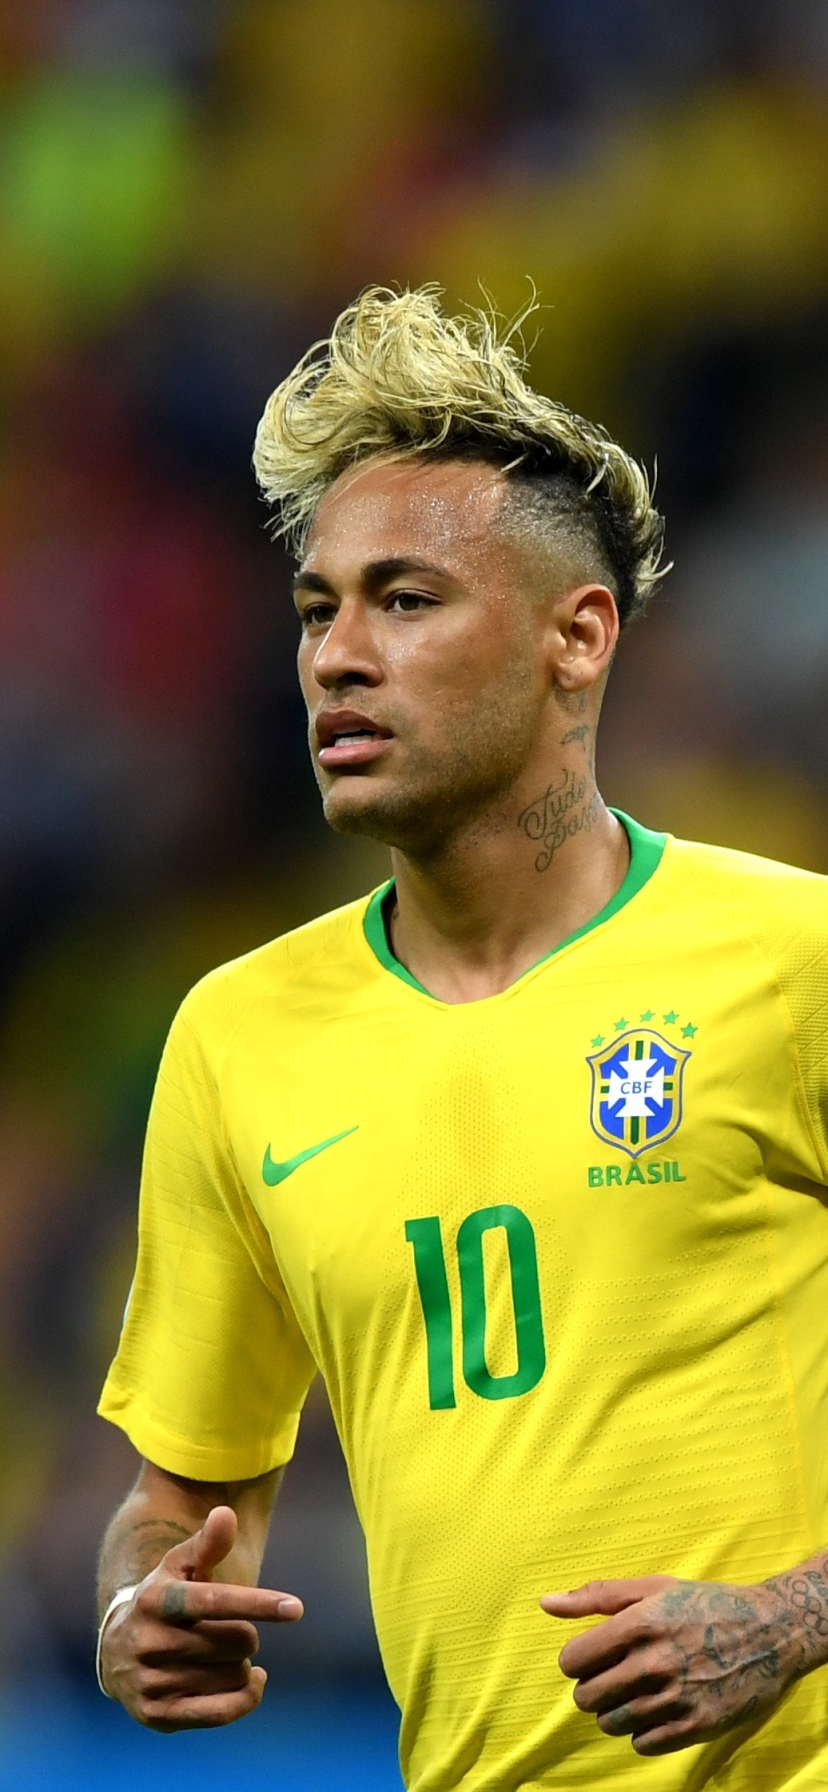 Download Neymar wallpaper for mobile phone, free Neymar HD picture